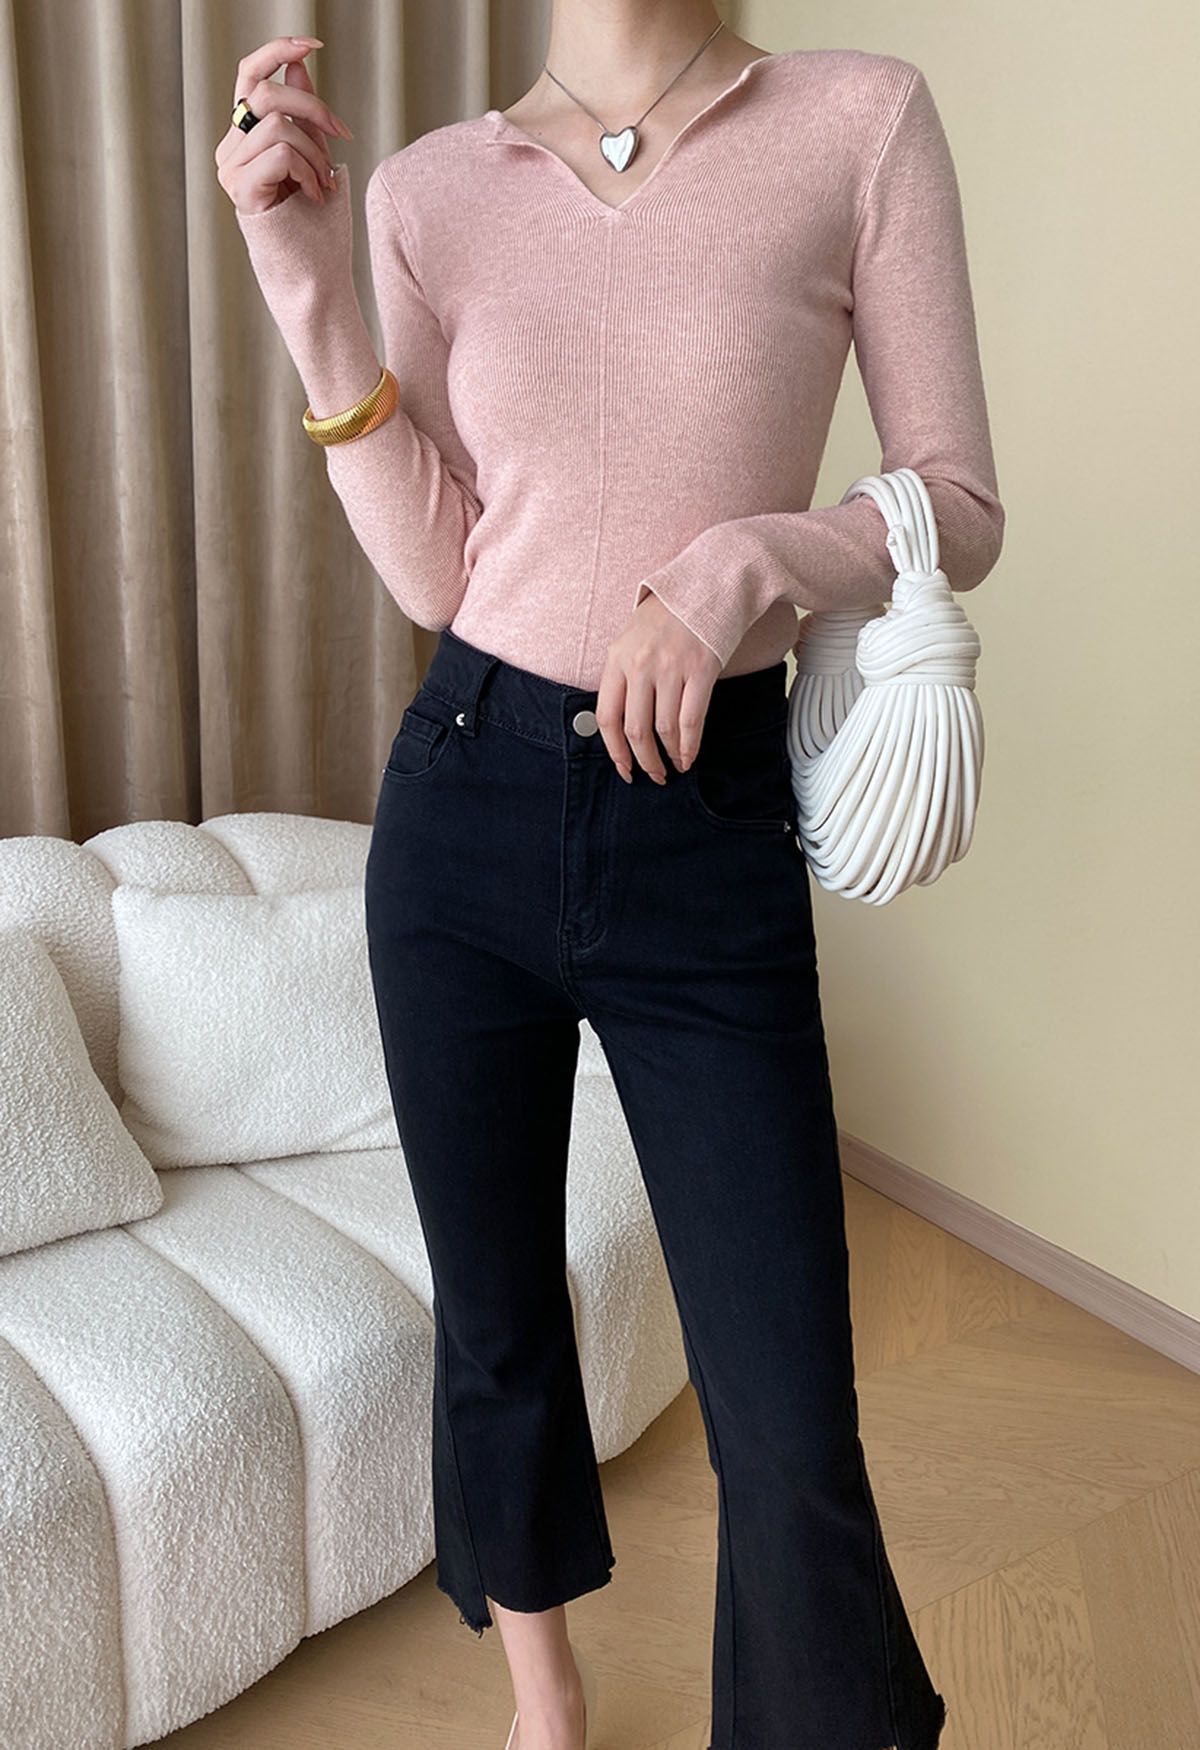 Notch Neckline Fitted Knit Top in Pink